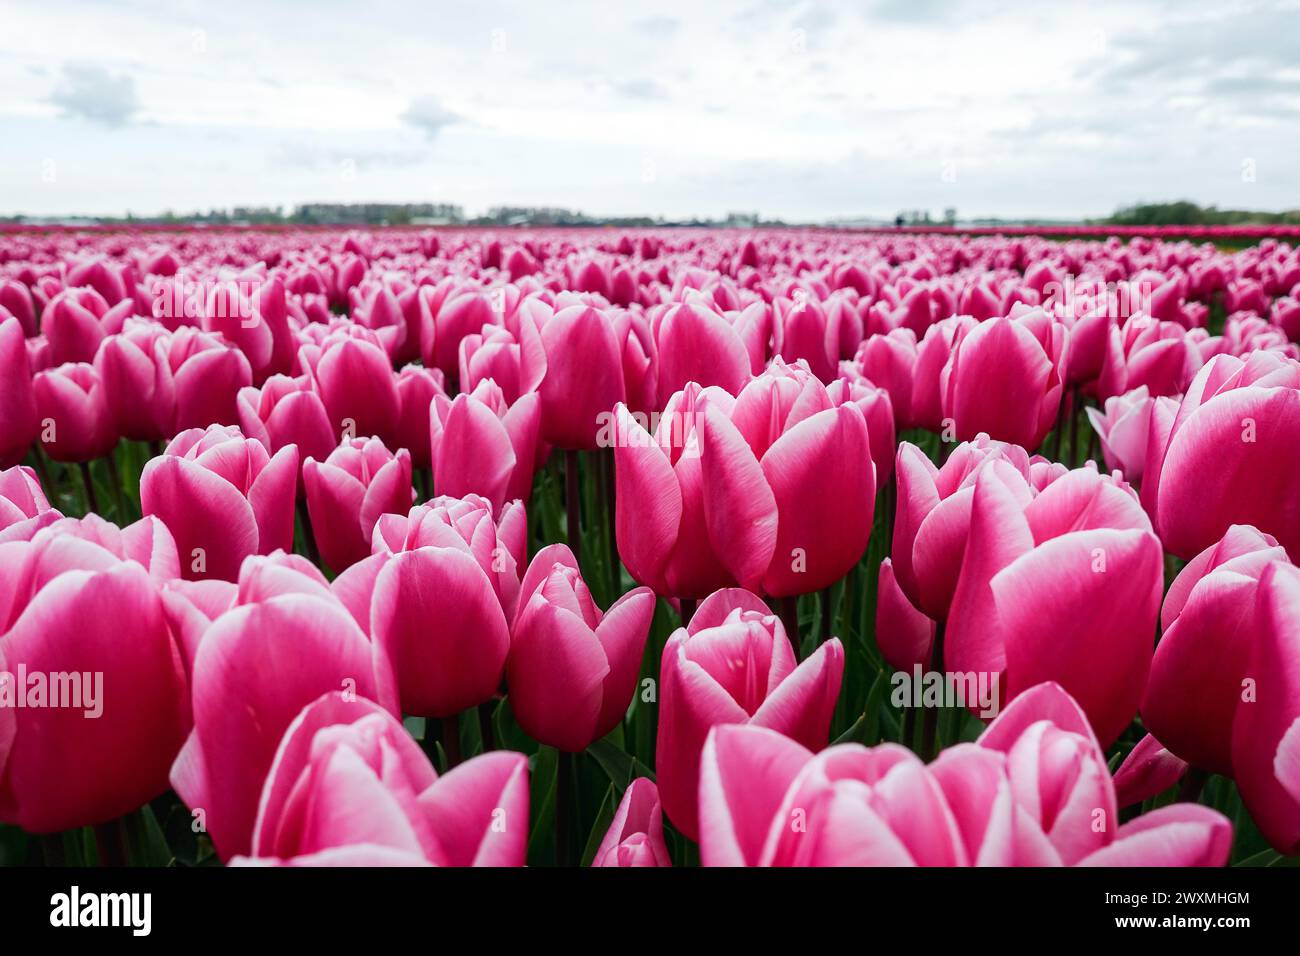 Vibrant red tulips blooming in a dense floral field, a stunning display of spring beauty, in the farming fields in the flower bulb region, Netherlands Stock Photo